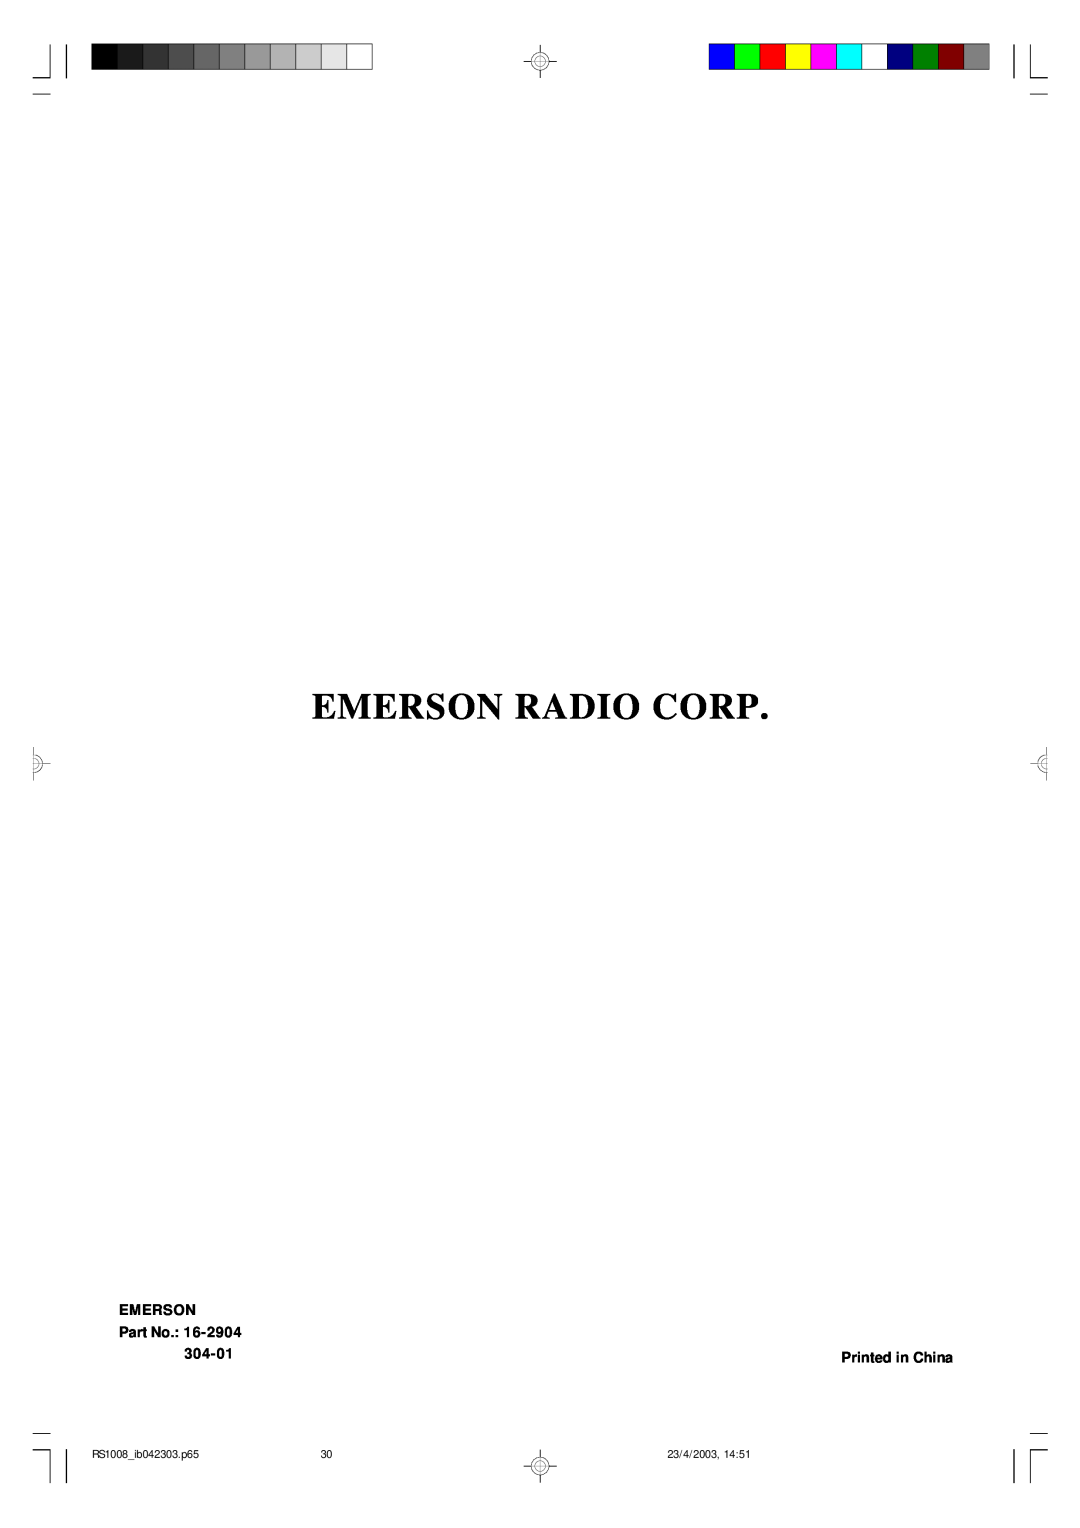 Emerson owner manual Emerson Radio Corp, 304-01, RS1008 ib042303.p65, 23/4/2003 